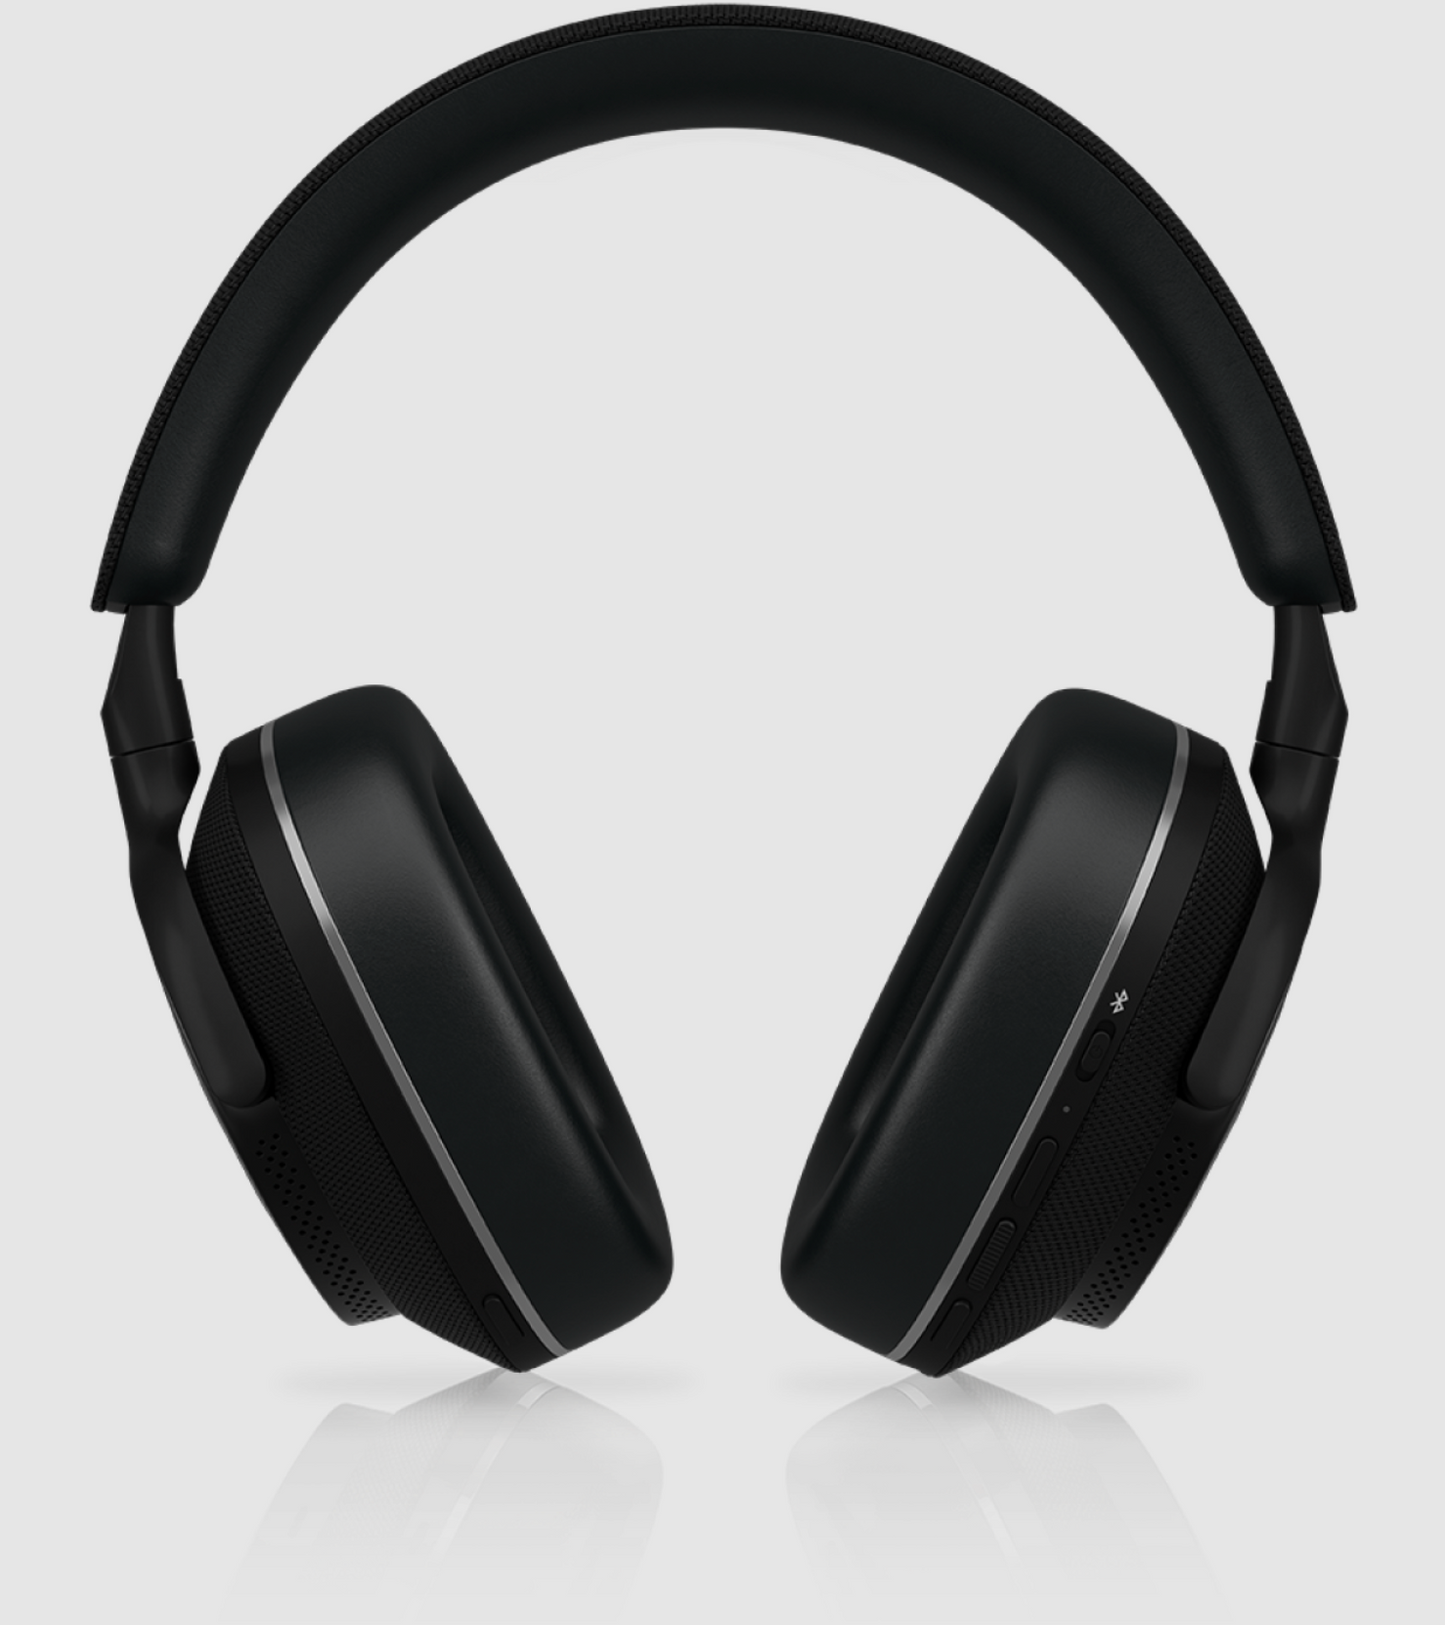 B&W Px7 S2e Noise Cancelling Headphones in Anthracite Black.  Image shows controls